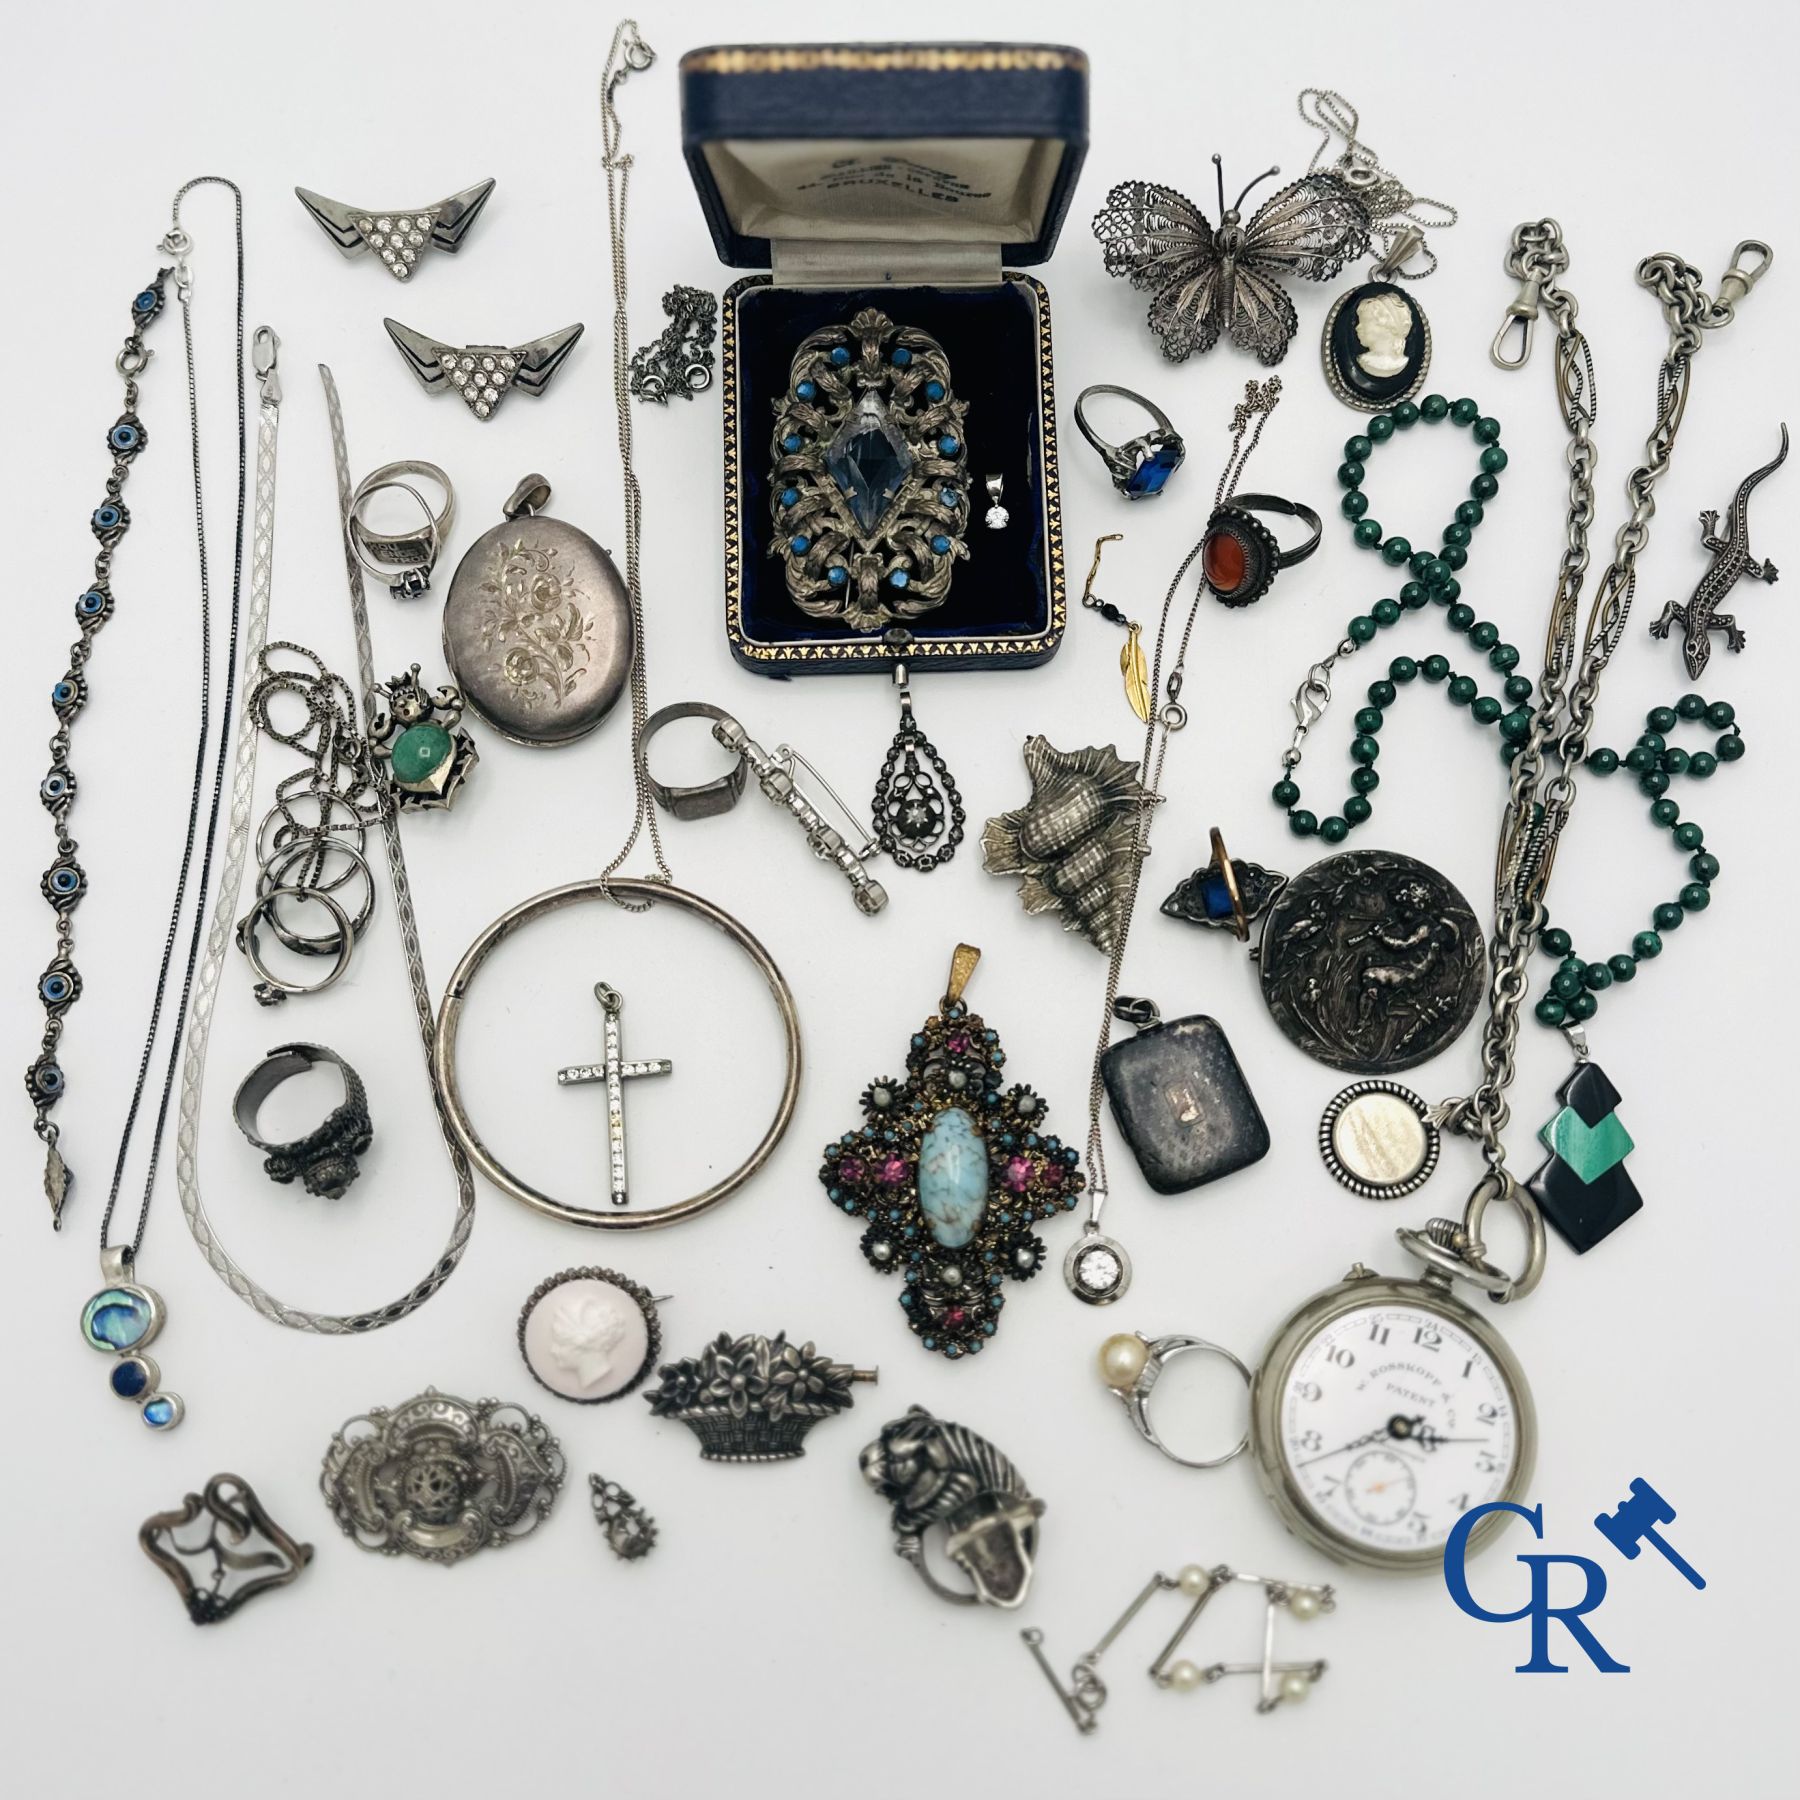 Jewellery-timepieces: Beautiful lot of fantasy jewellery and a pocket watch, some in silver.